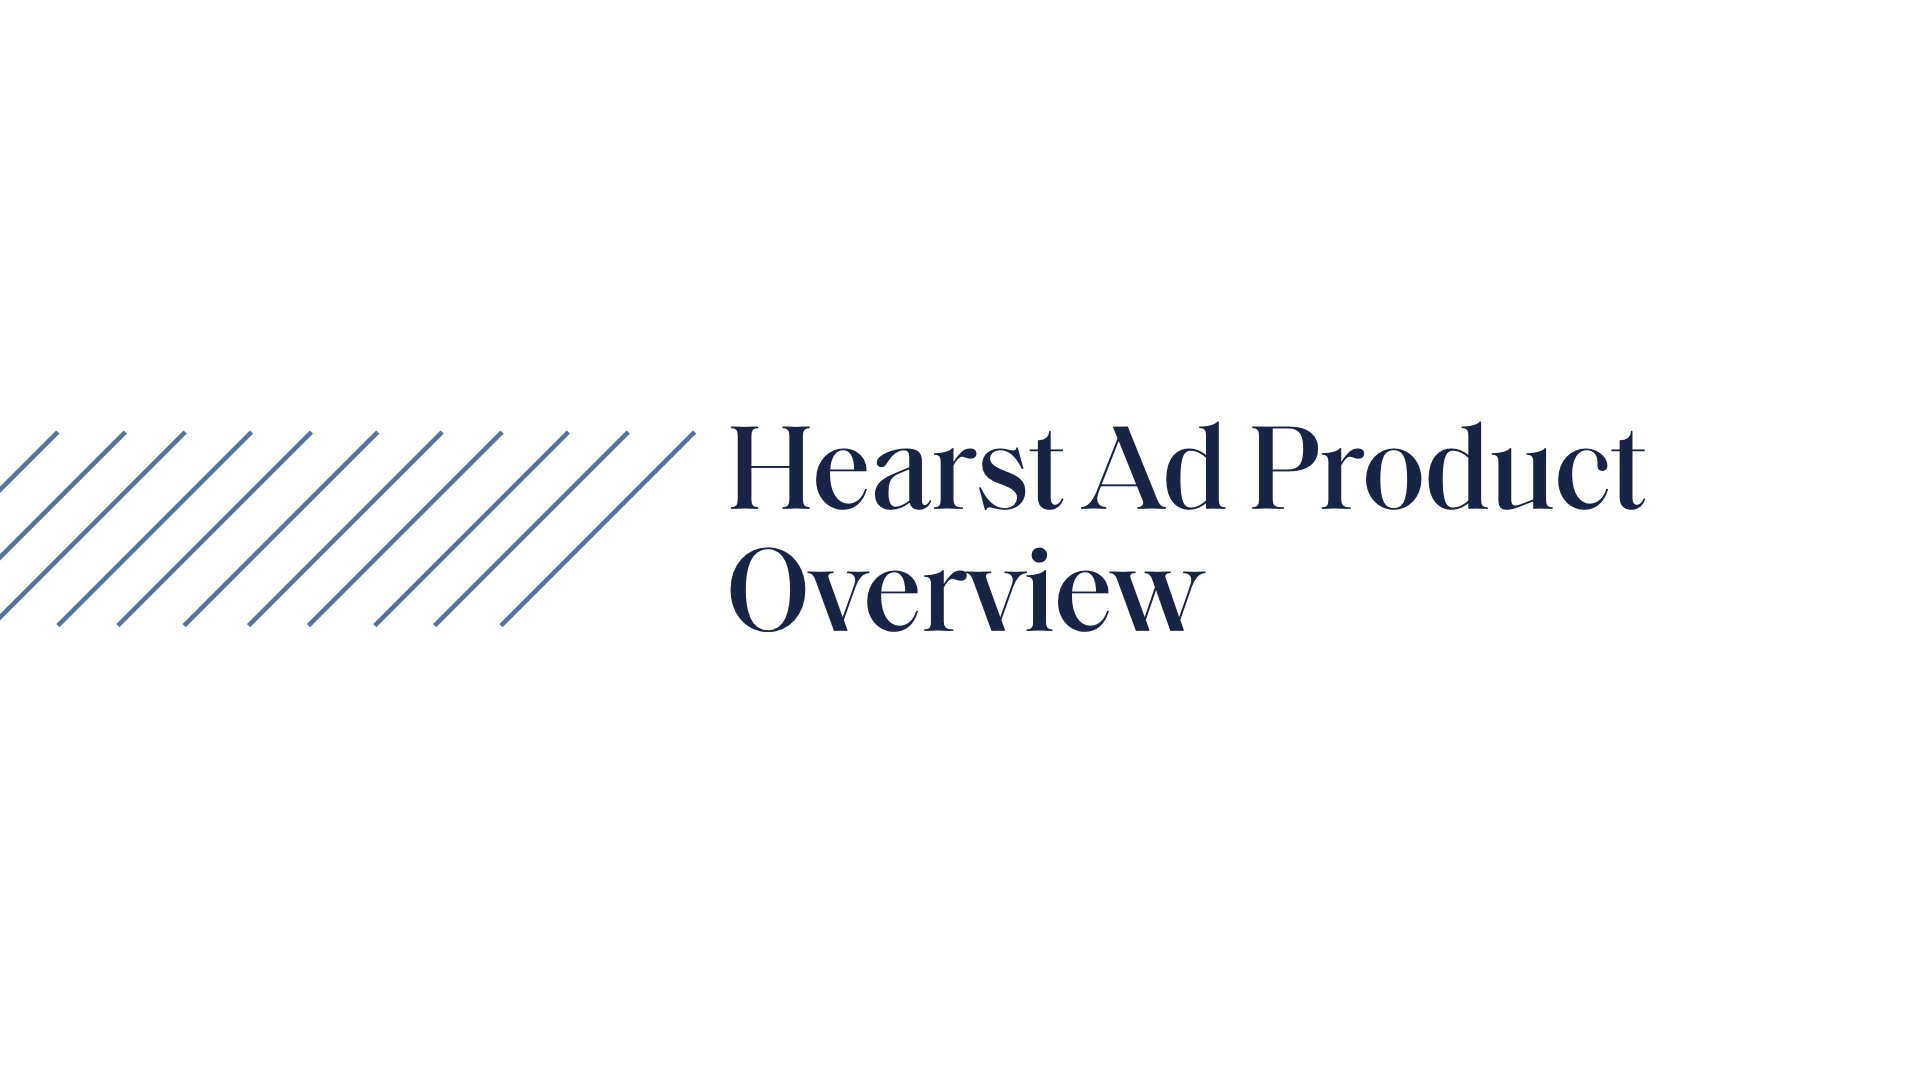 Hearst Ad Product Overview MP website JPGs.001.jpeg